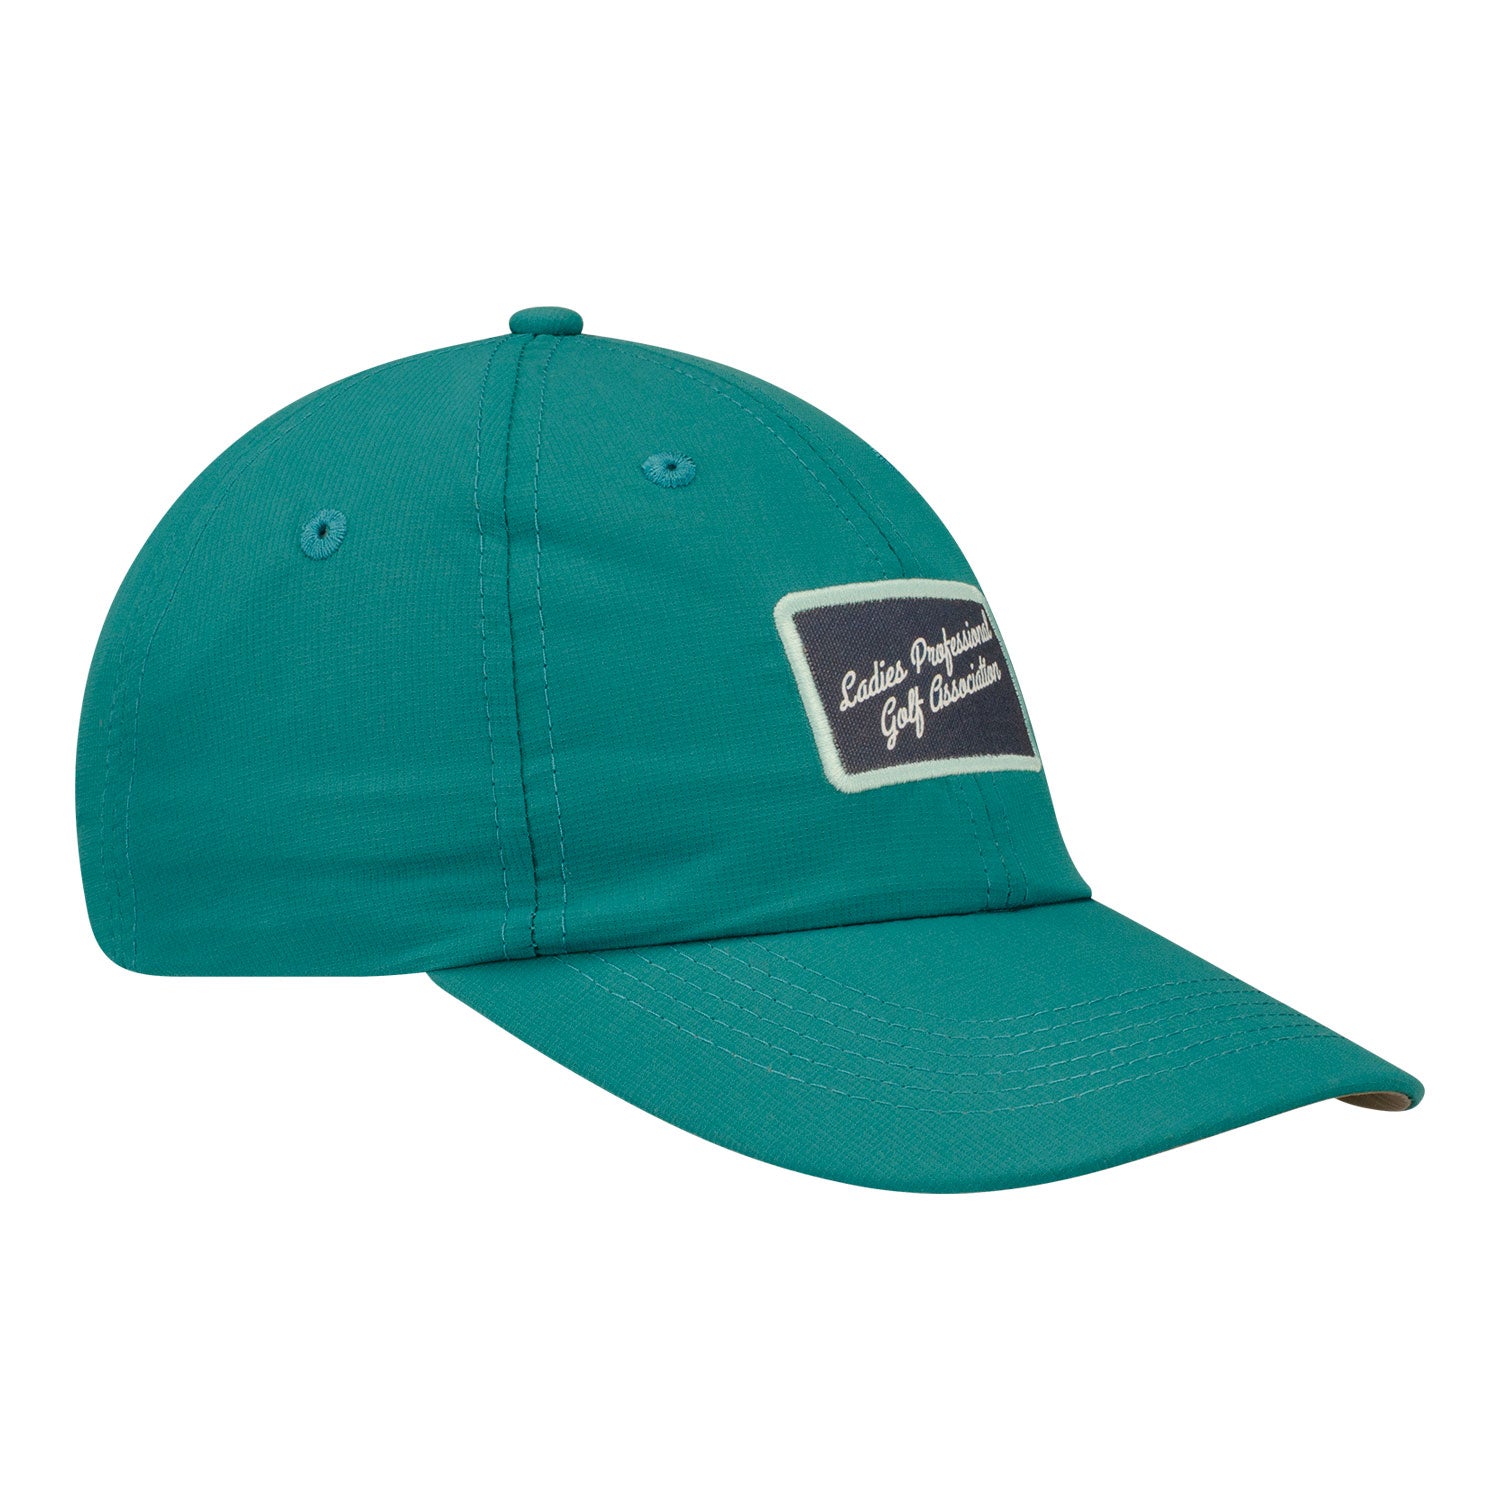 Imperial LPGA Women's Hat in Teal - Angled Right Side View